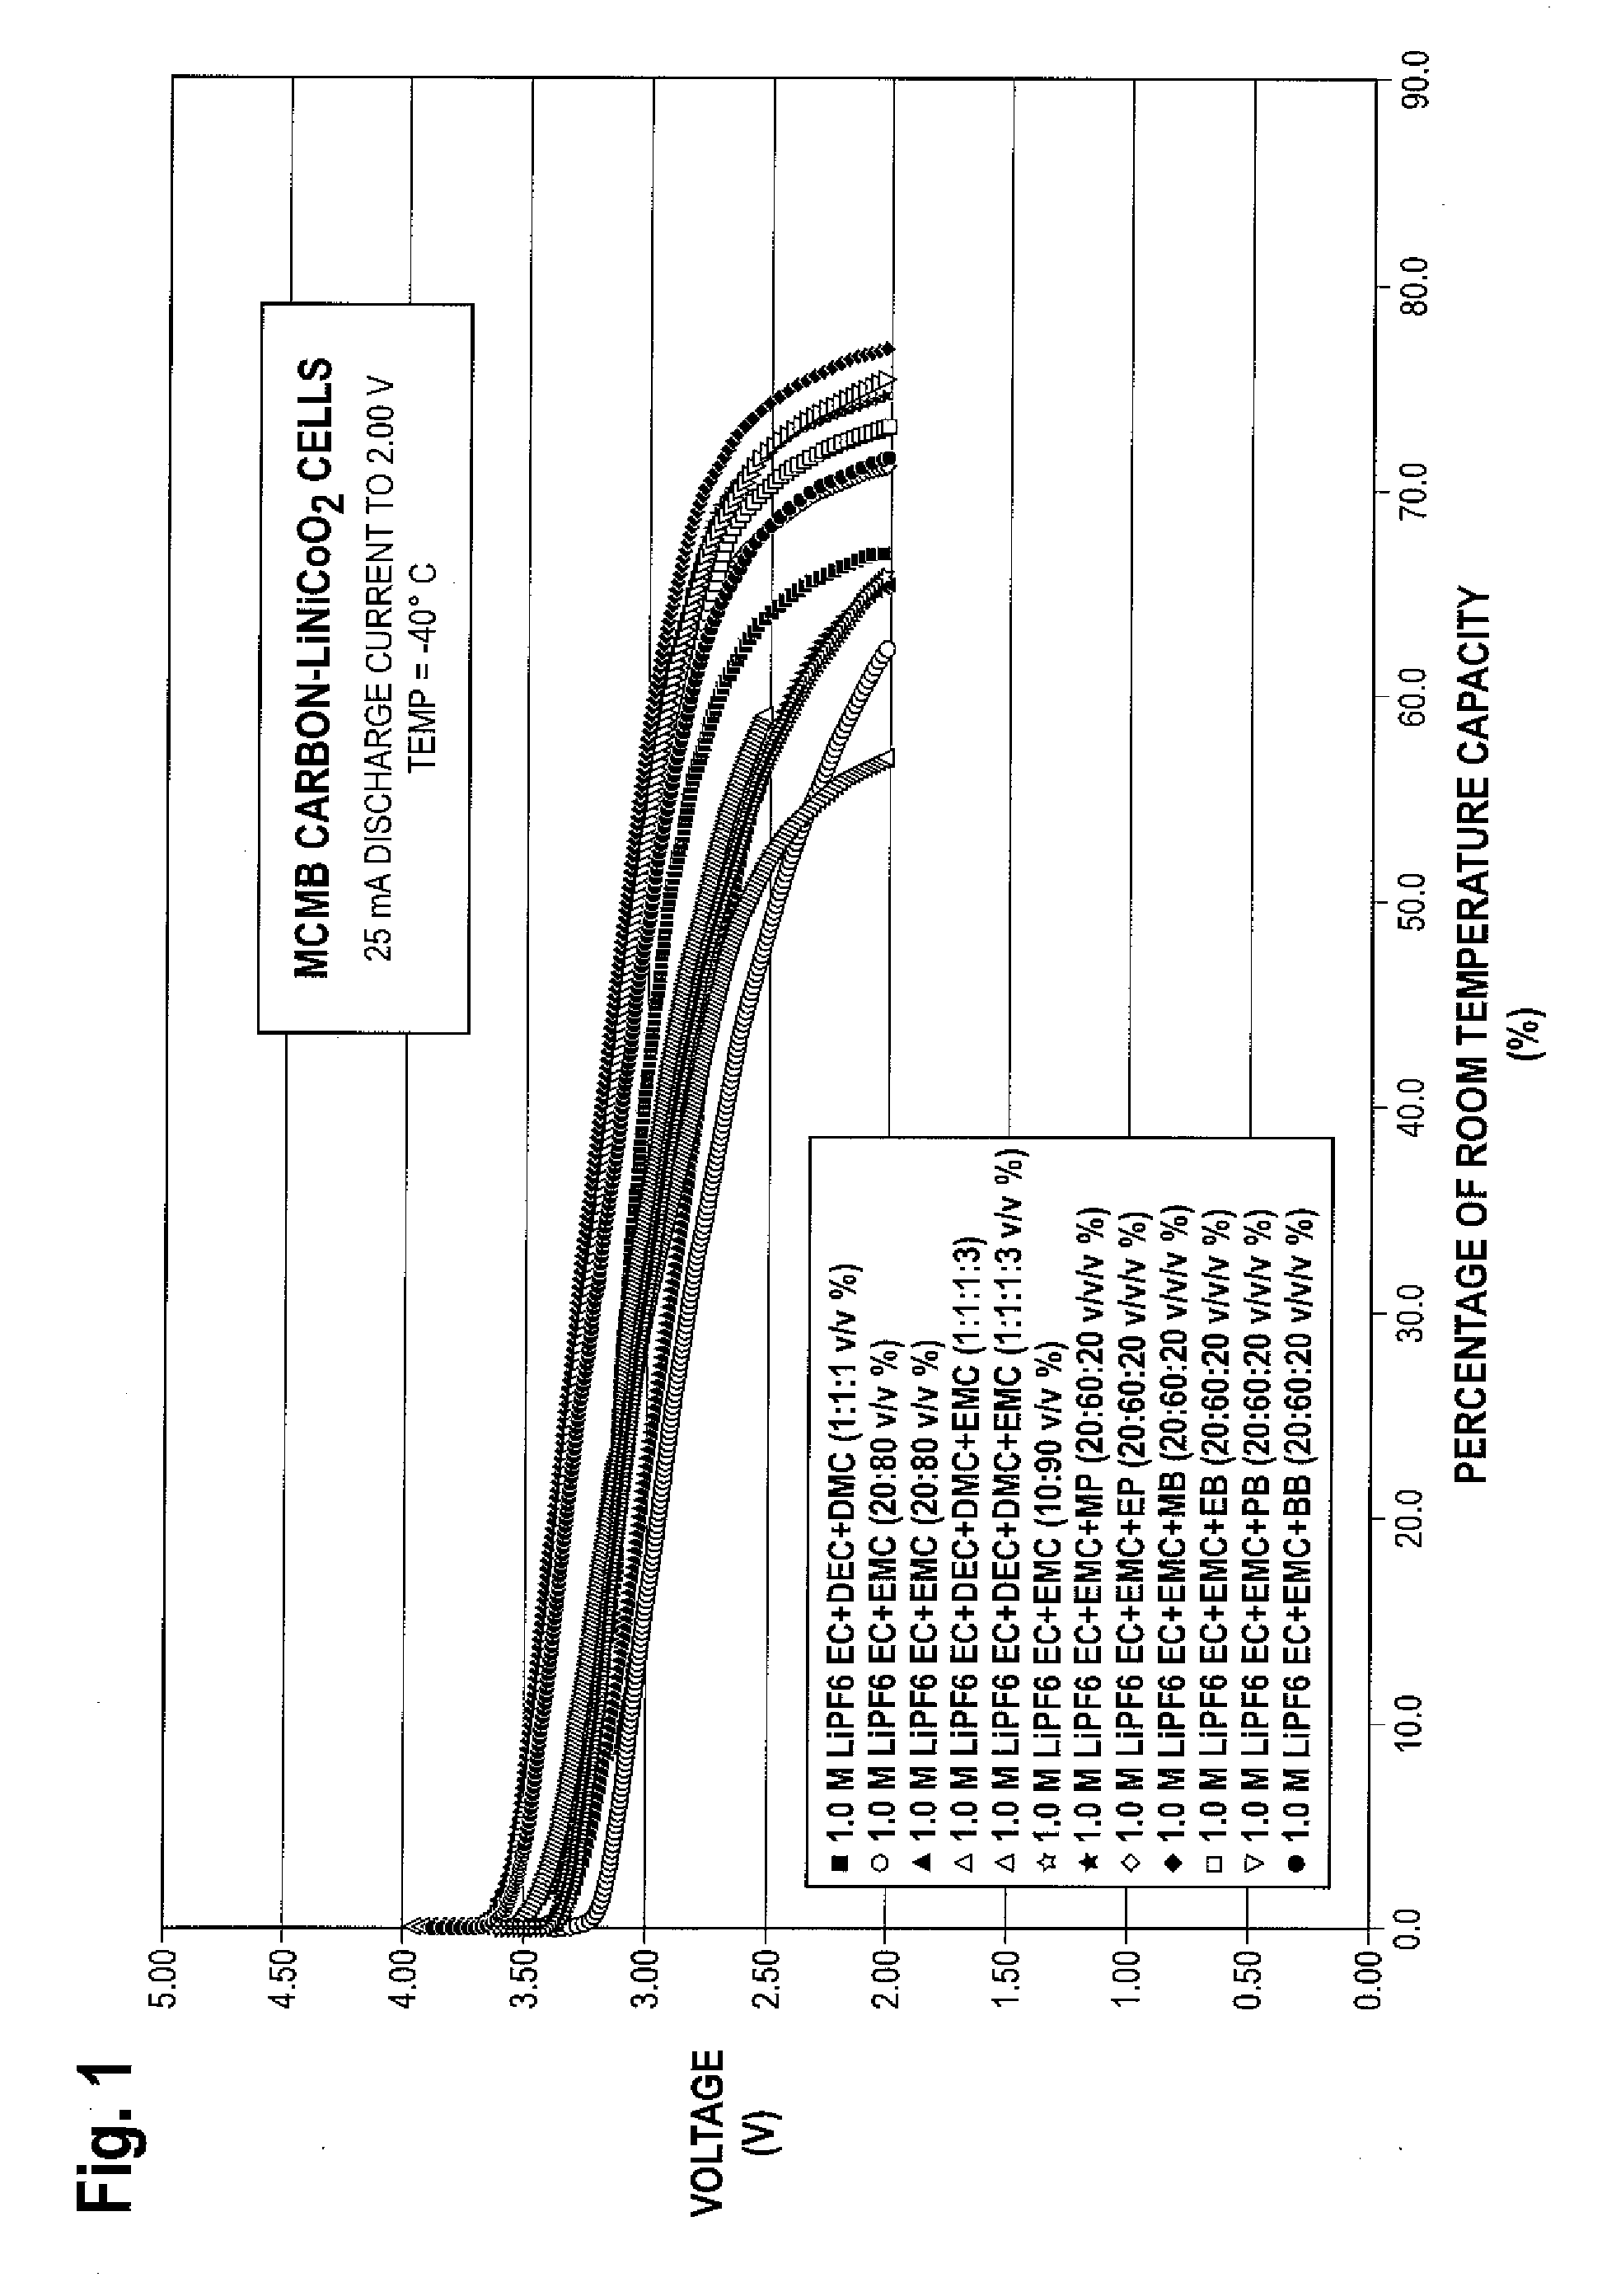 Lithium ion electrolytes and lithium ion cells with good low temperature performance